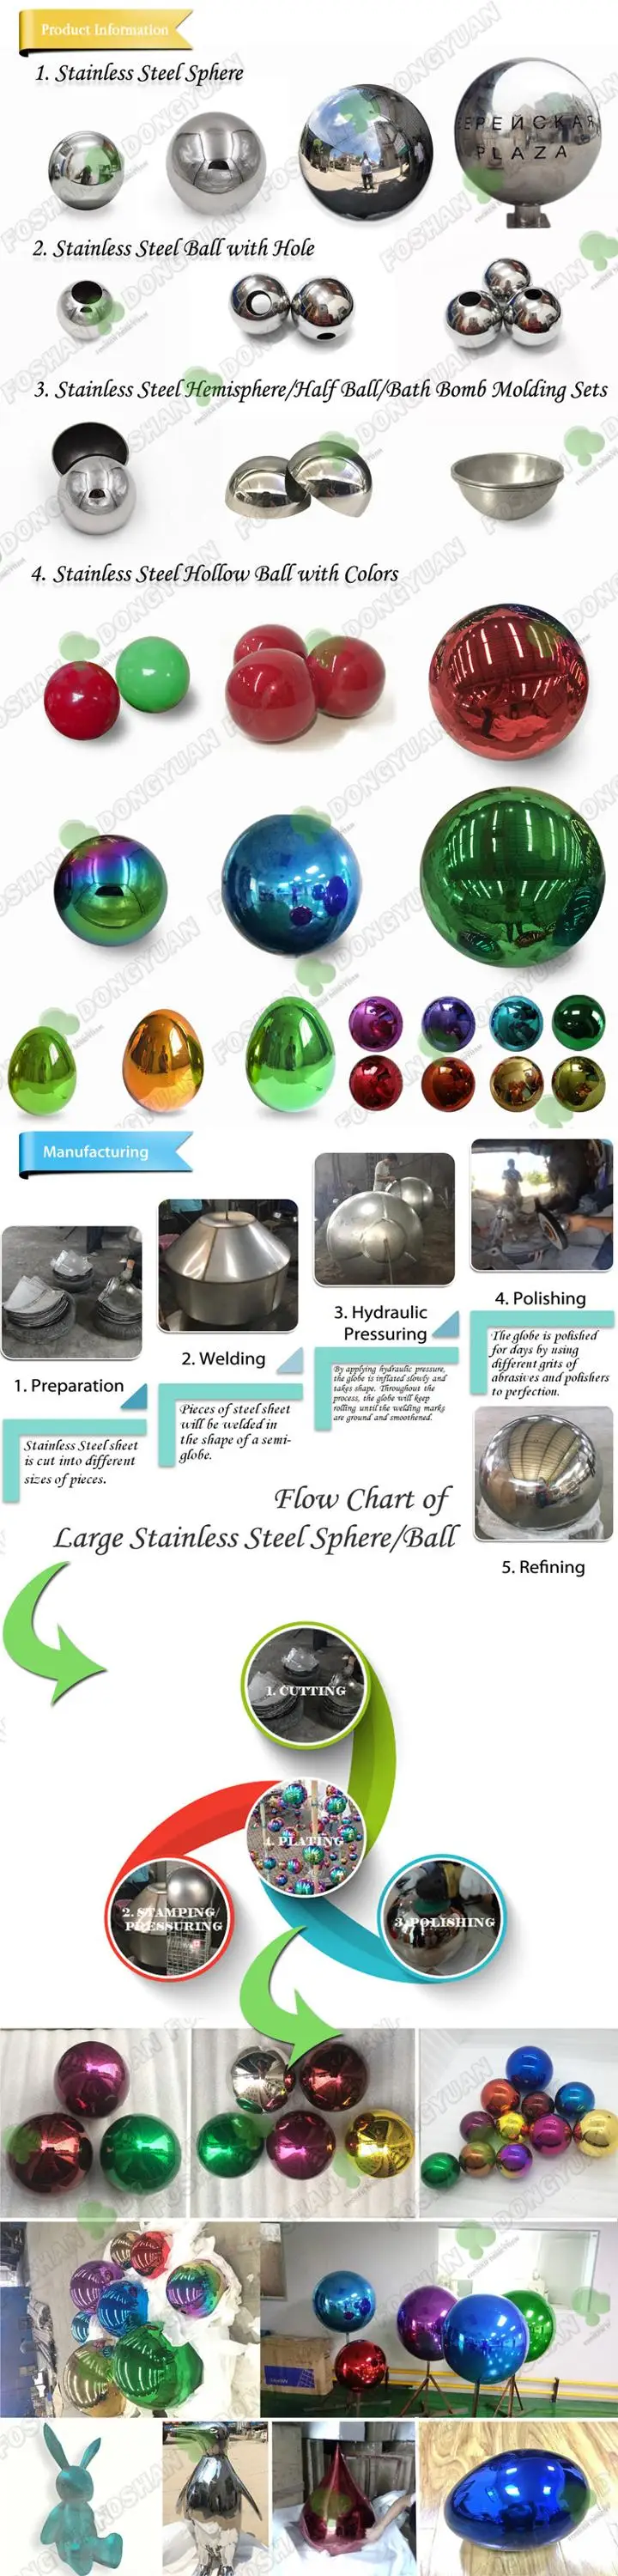 Polished Stainless Steel Ball for Pool Decoration